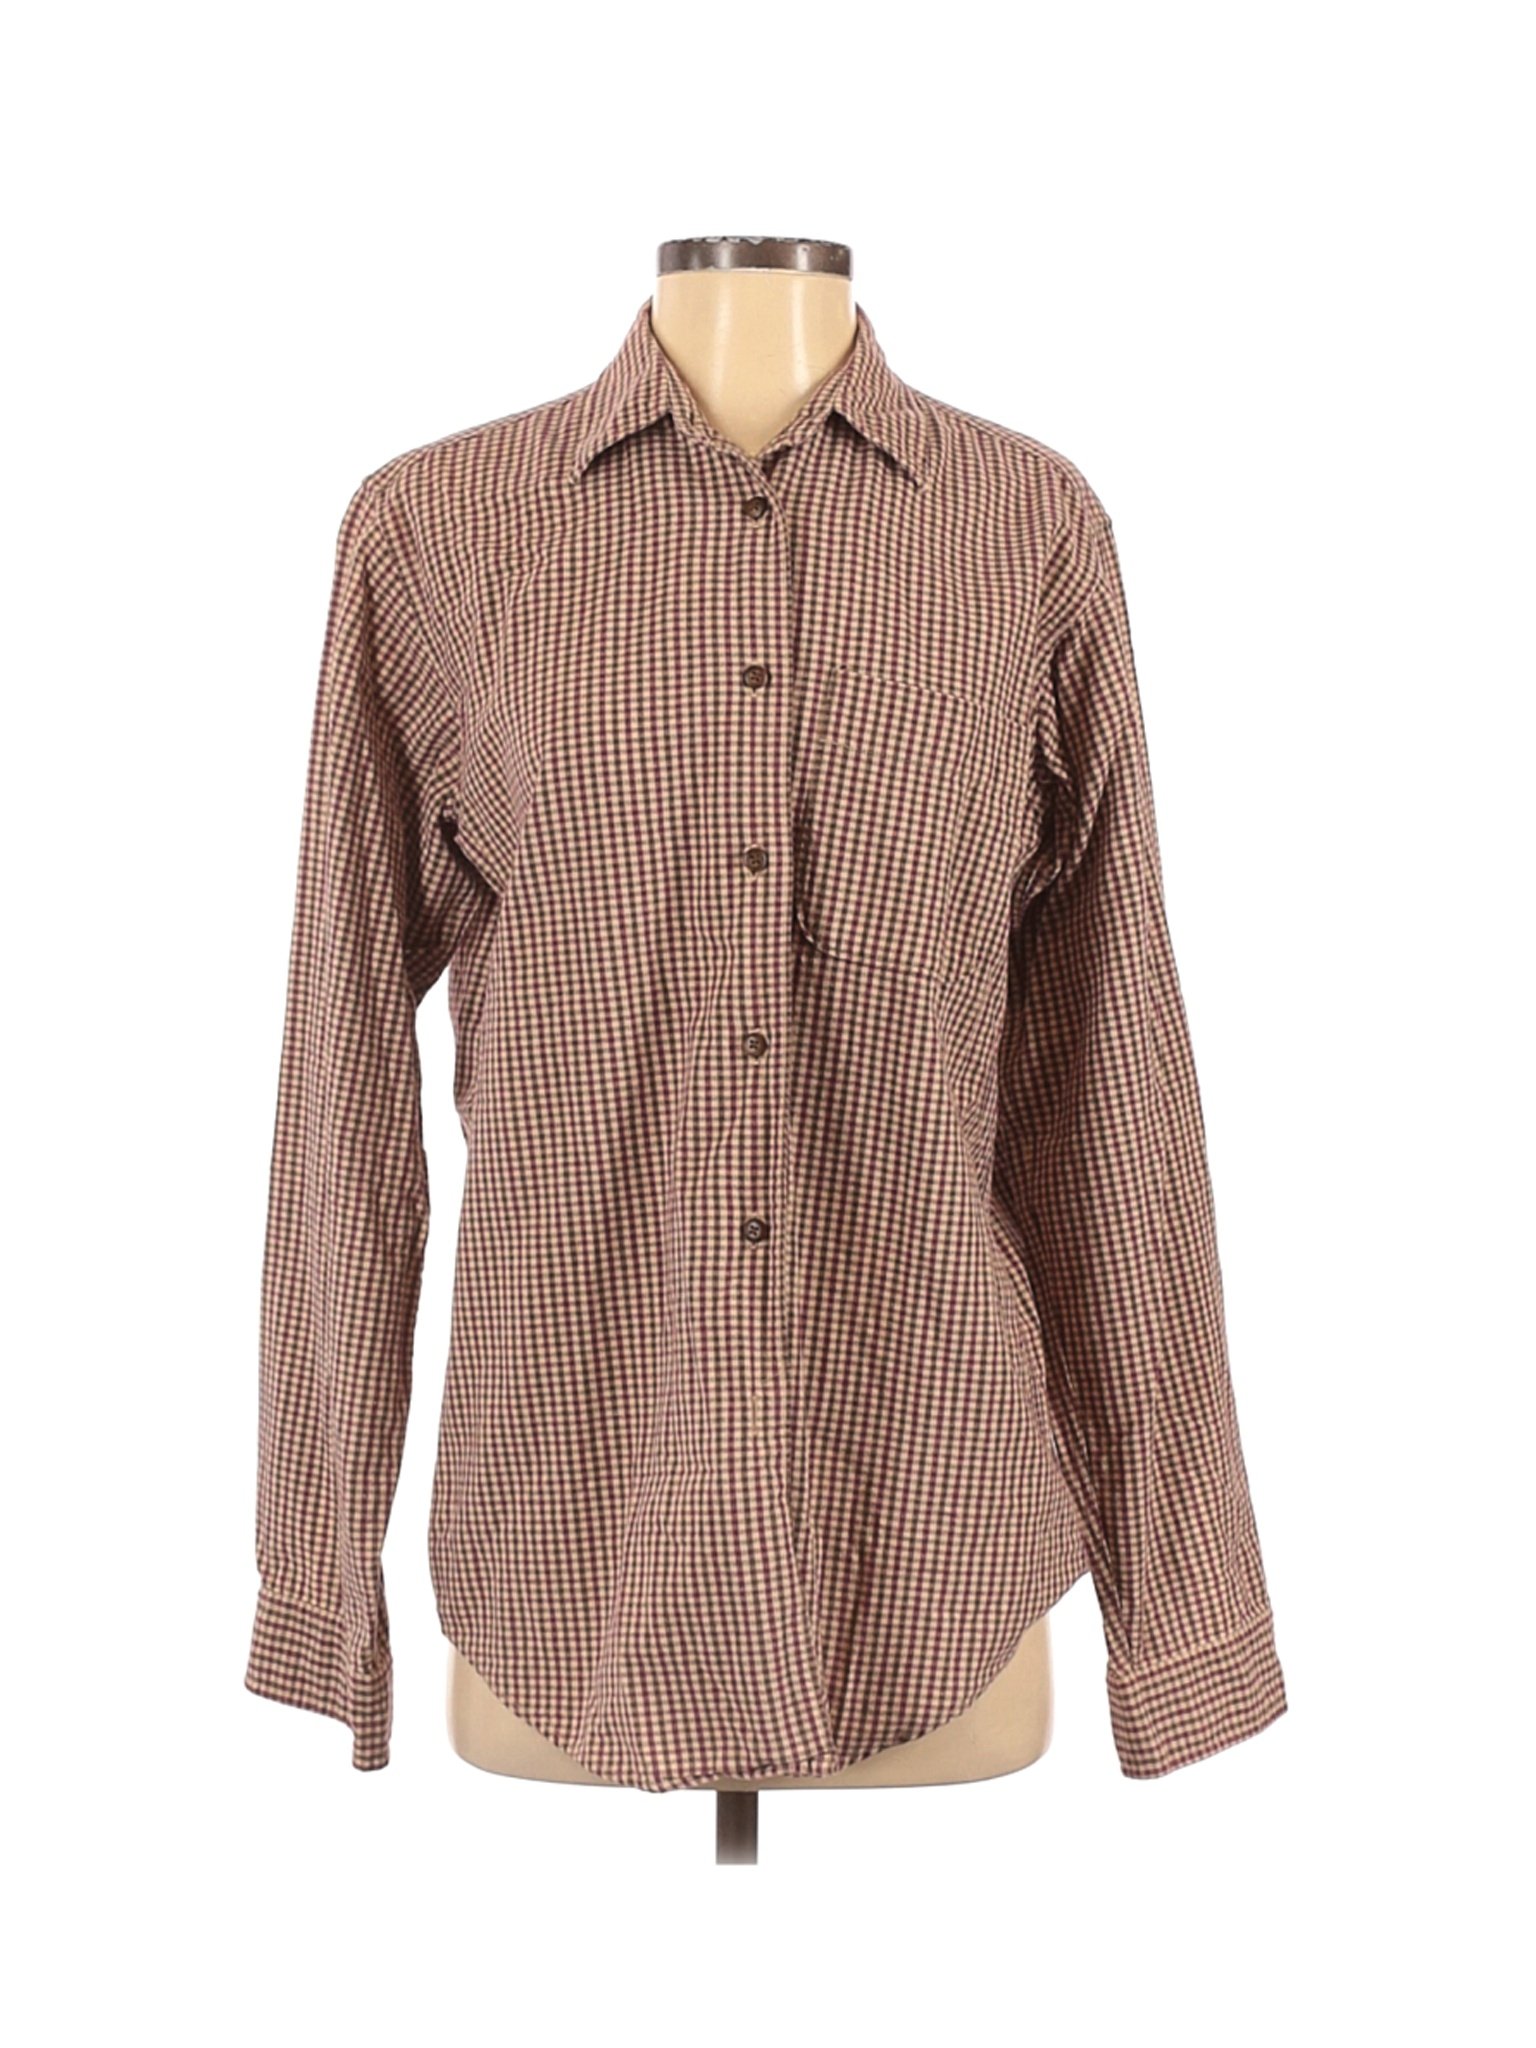 Abercrombie & Fitch Women Brown Long Sleeve Button-Down Shirt S | eBay